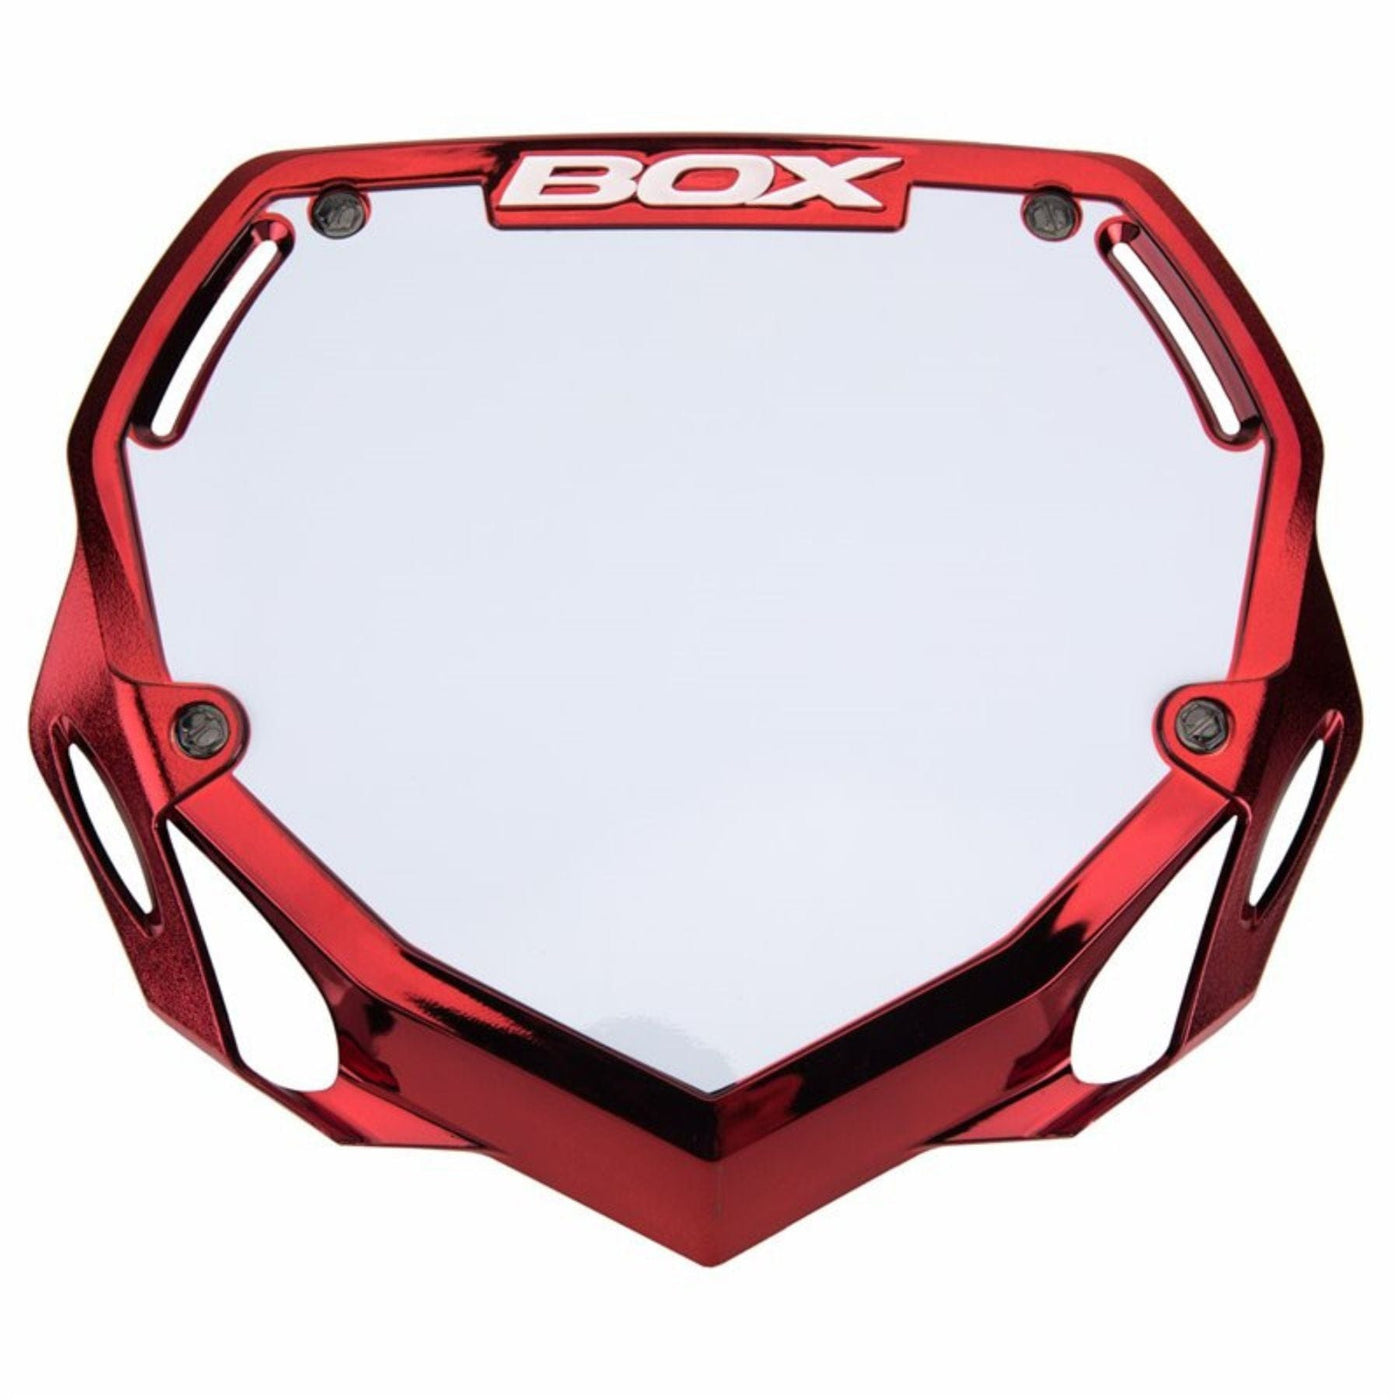 Box One BMX Racing Number Plate - Chrome Red Large 8Lines Shop - Fast Shipping